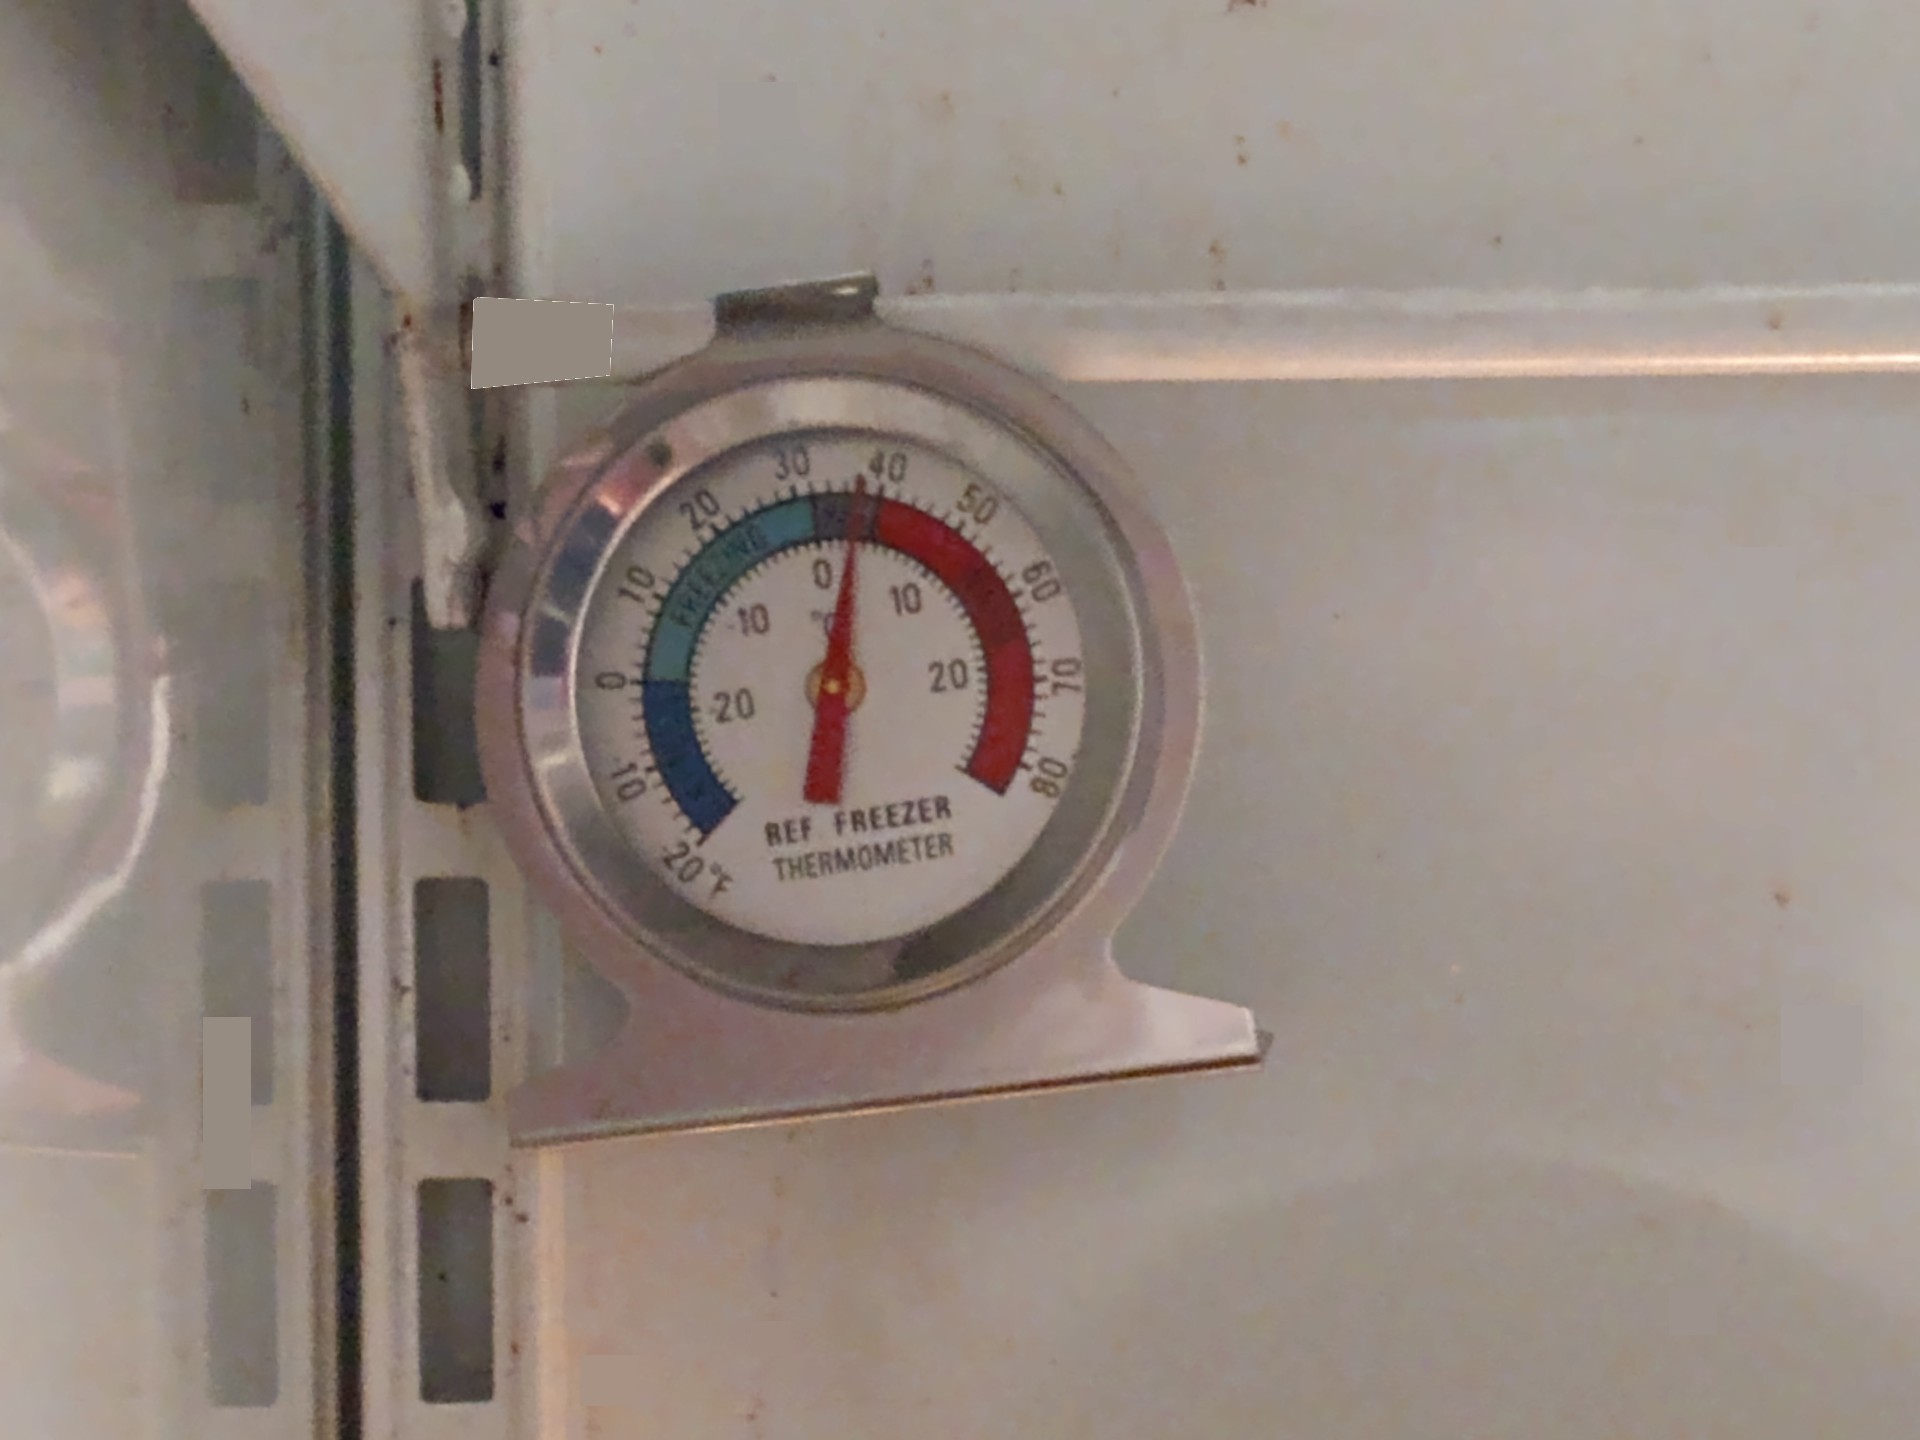 What my fridge thermometer from eBay looks like.